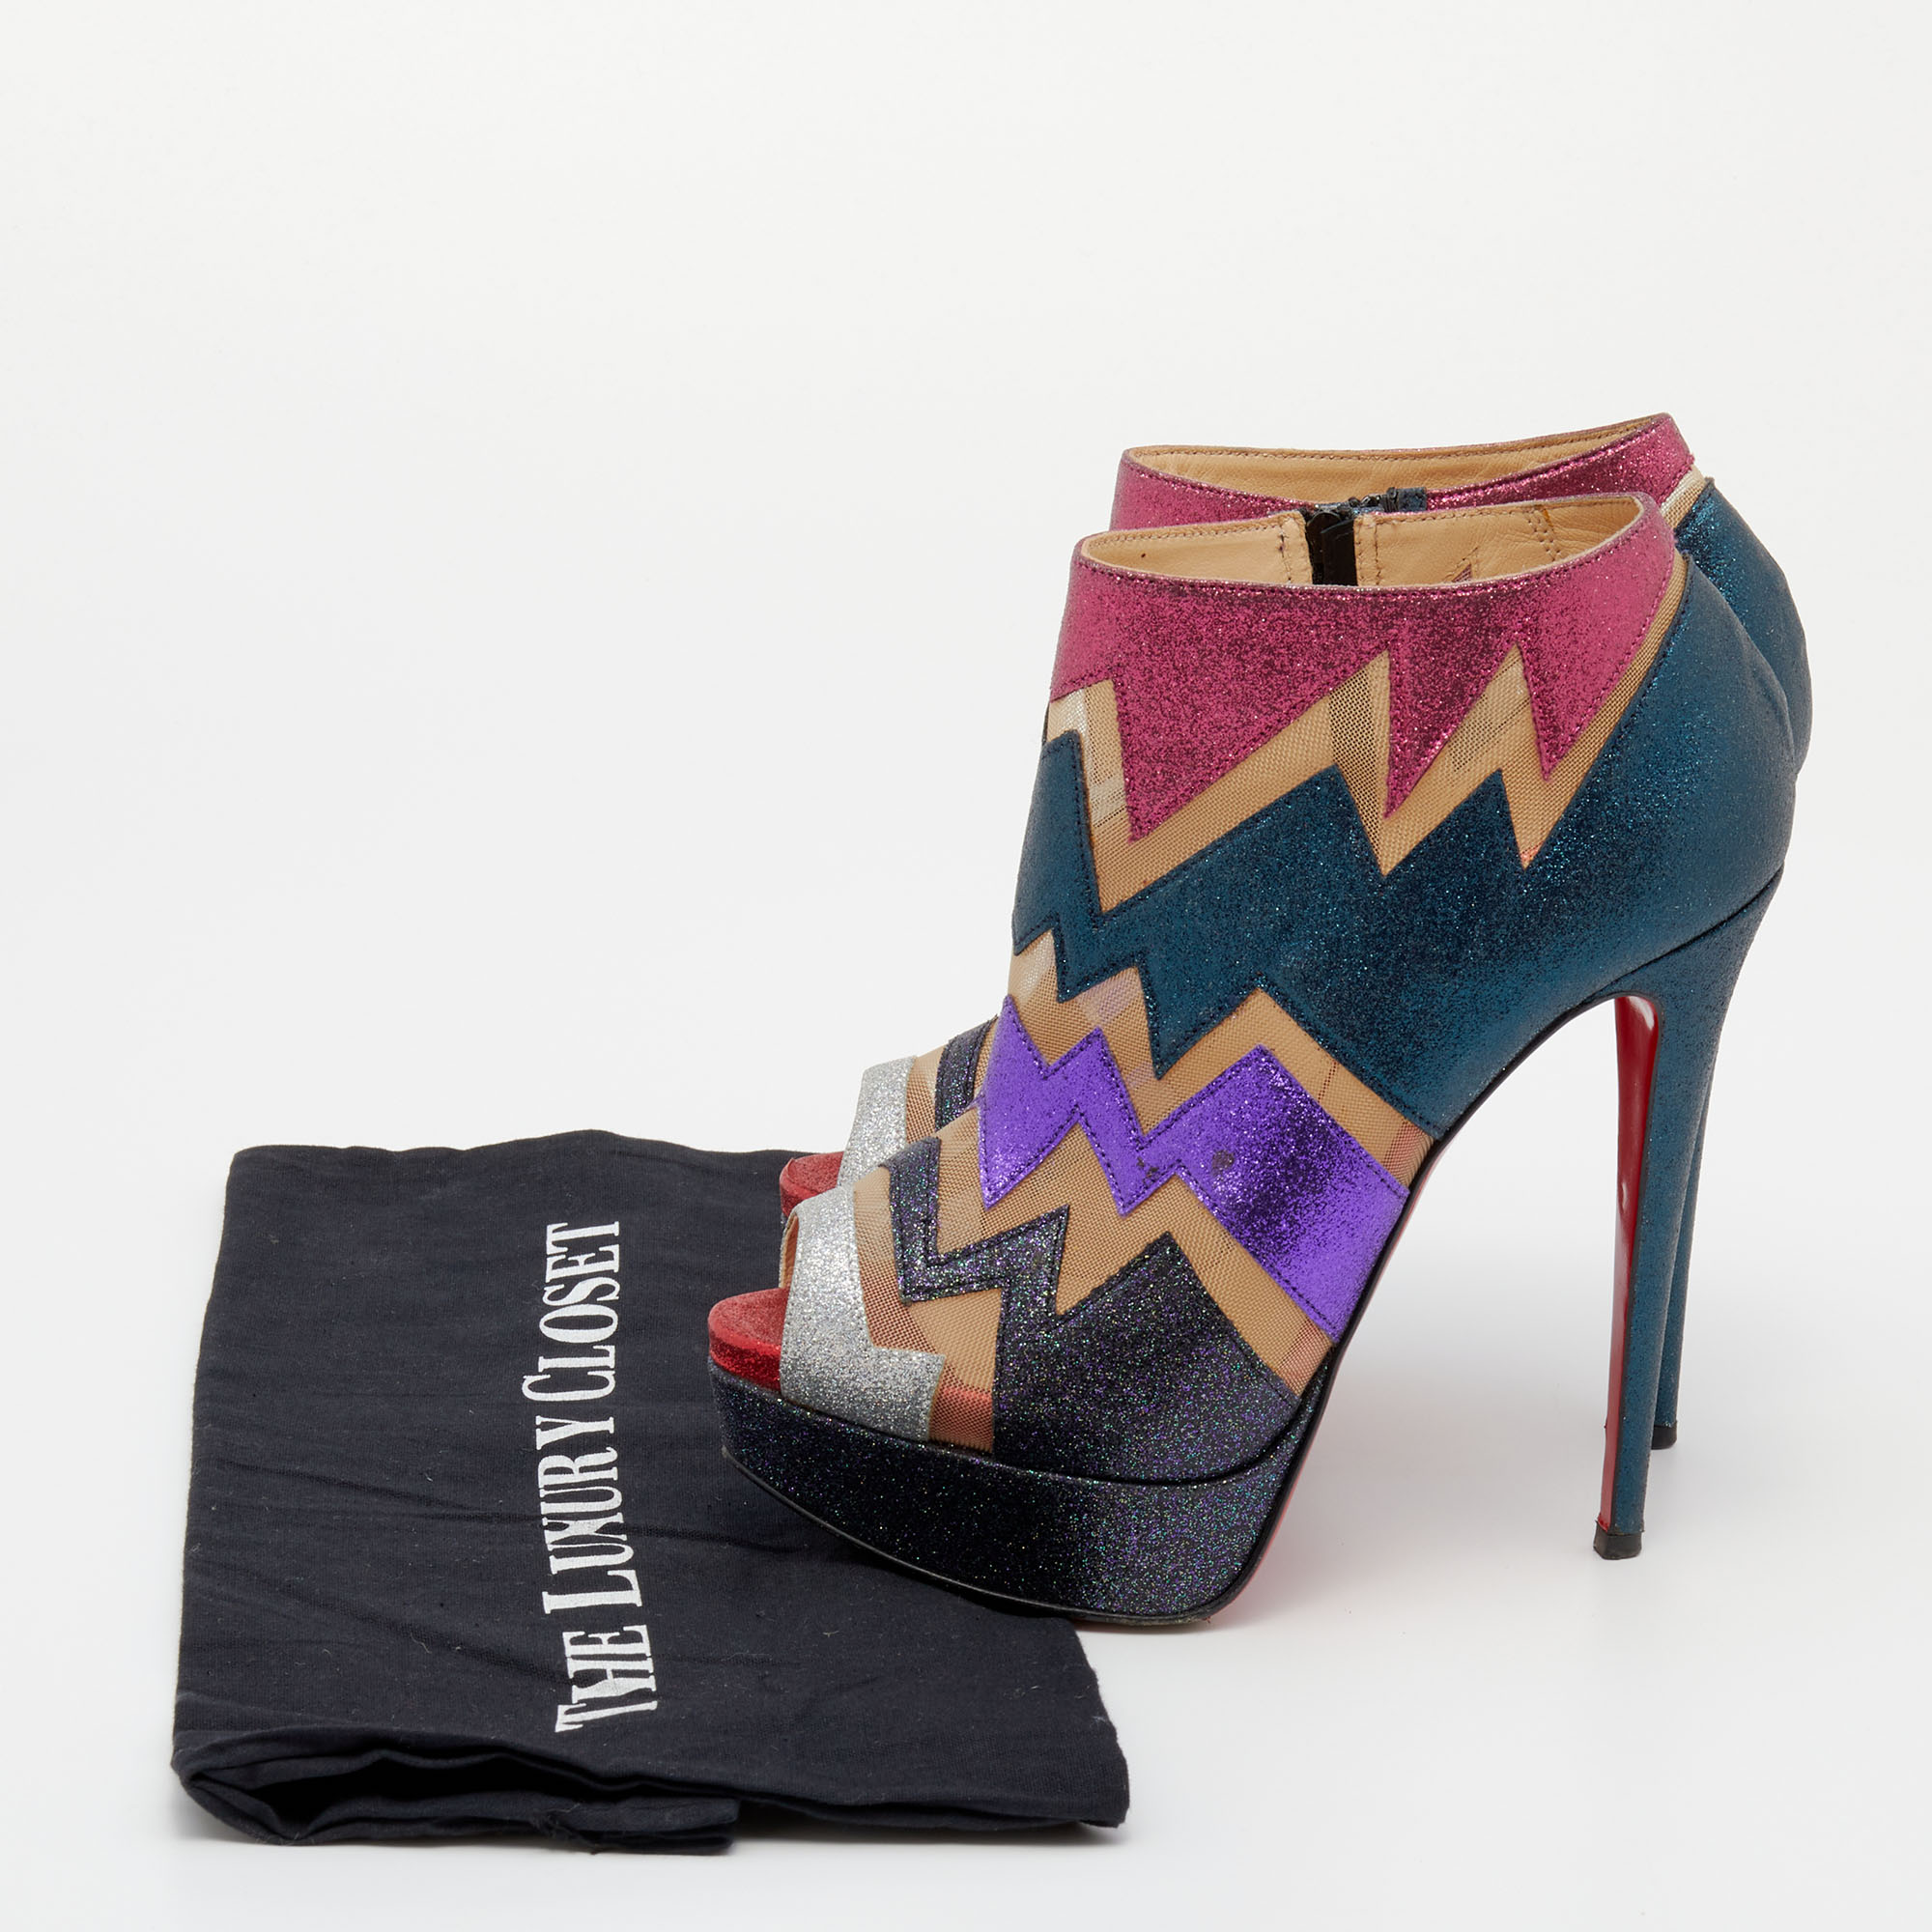 Christian Louboutin Multicolor Glitter And Mesh Ziggy Peep-Toe Ankle Booties Size37.5